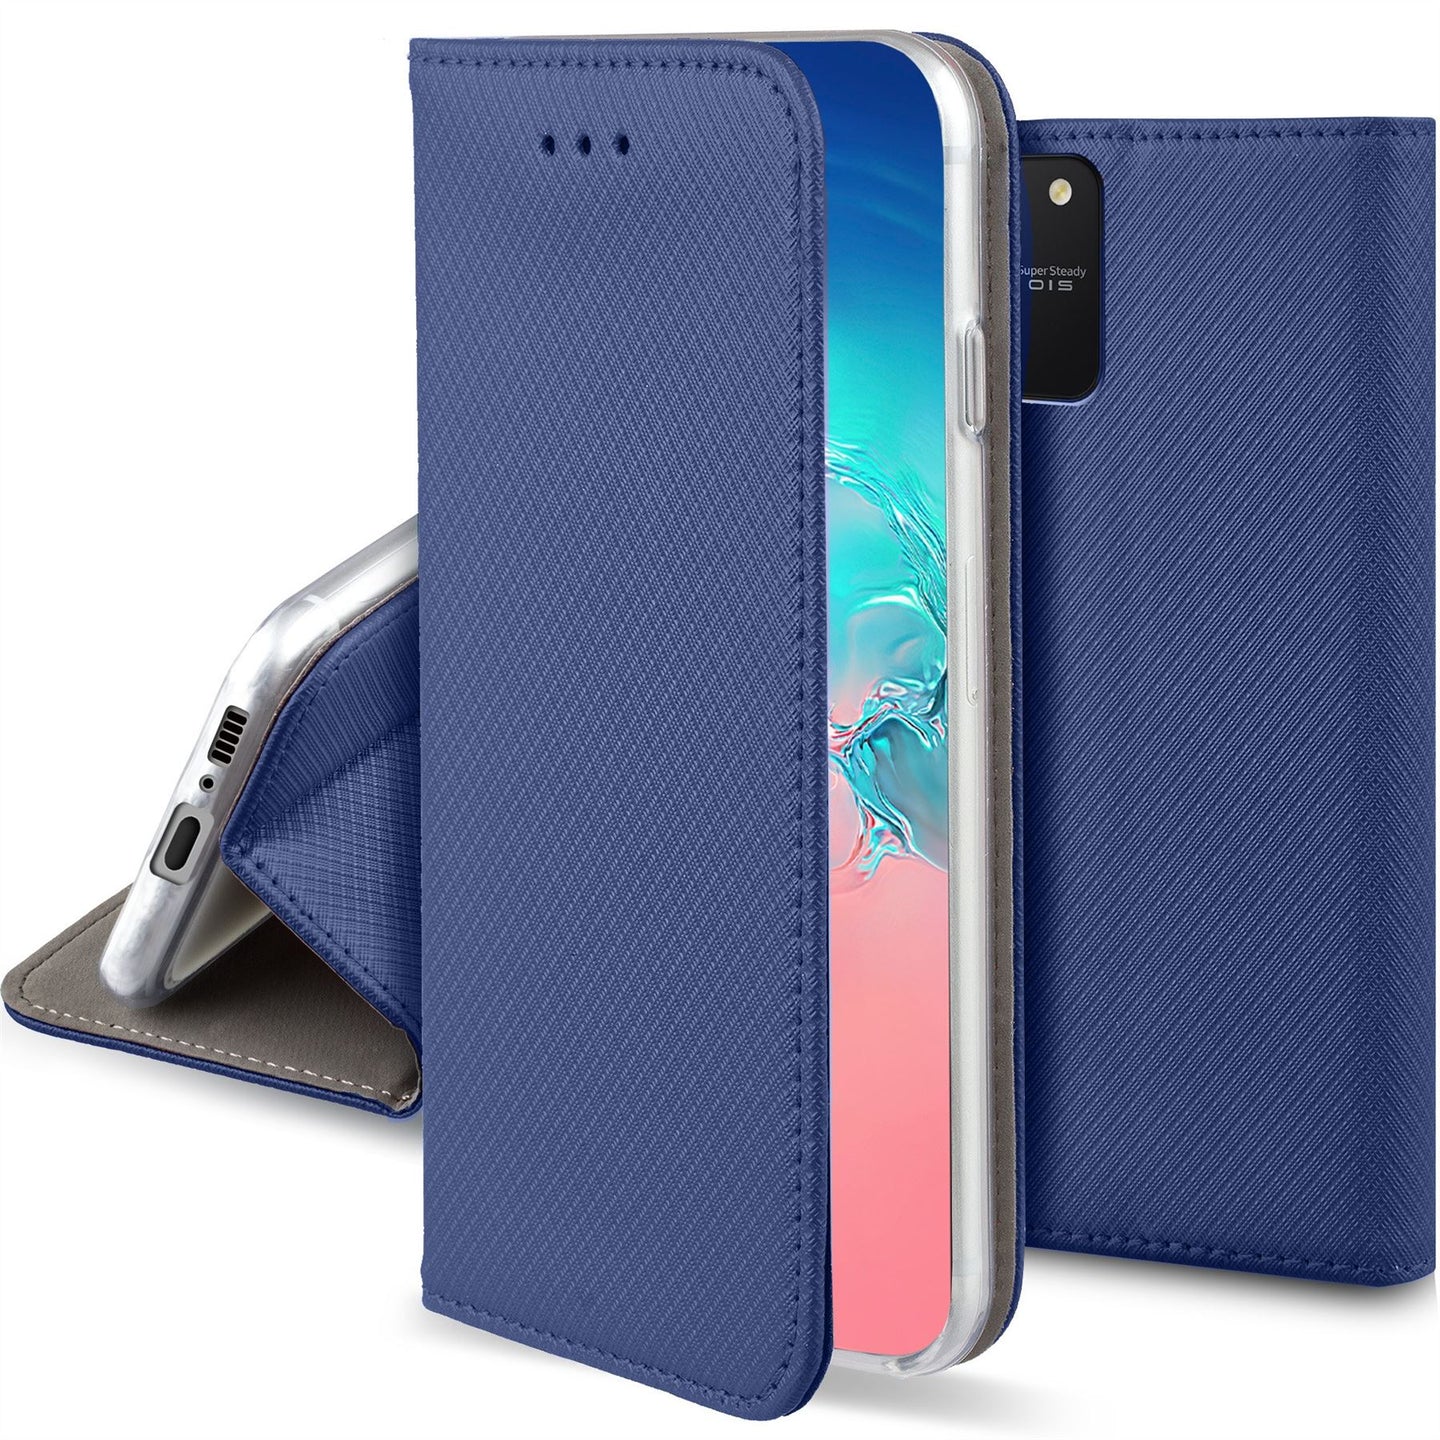 Moozy Case Flip Cover for Samsung S10 Lite, Dark Blue - Smart Magnetic Flip Case with Card Holder and Stand